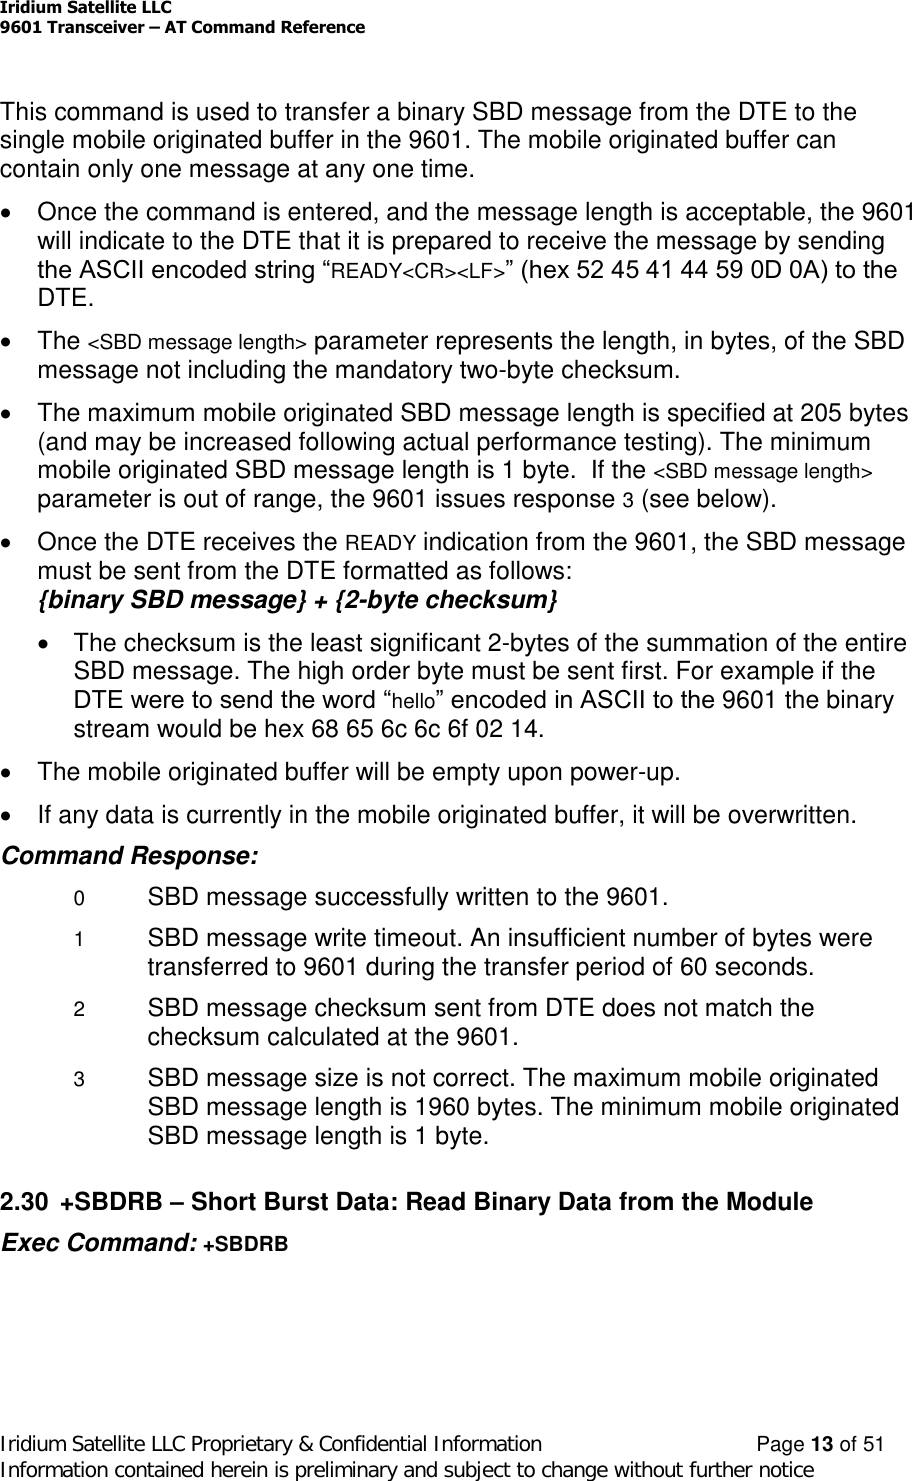 Iridium Satellite LLC9601 Transceiver –AT Command ReferenceIridium Satellite LLC Proprietary &amp; Confidential Information Page 13 of 51Information contained herein is preliminary and subject to change without further noticeThis command is used to transfer a binary SBD message from the DTE to thesingle mobile originated buffer in the 9601. The mobile originated buffer cancontain only one message at any one time.Once the command is entered, and the message length is acceptable, the 9601will indicate to the DTE that it is prepared to receive the message by sendingthe ASCII encoded string “READY&lt;CR&gt;&lt;LF&gt;” (hex 52 45 41 44 59 0D 0A) to the DTE.The &lt;SBD message length&gt; parameter represents the length, in bytes, of the SBDmessage not including the mandatory two-byte checksum.The maximum mobile originated SBD message length is specified at 205 bytes(and may be increased following actual performance testing). The minimummobile originated SBD message length is 1 byte. If the &lt;SBD message length&gt;parameter is out of range, the 9601 issues response 3(see below).Once the DTE receives the READY indication from the 9601, the SBD messagemust be sent from the DTE formatted as follows:{binary SBD message} + {2-byte checksum}The checksum is the least significant 2-bytes of the summation of the entireSBD message. The high order byte must be sent first. For example if theDTE were to send the word “hello” encoded in ASCII to the 9601 the binarystream would be hex 68 65 6c 6c 6f 02 14.The mobile originated buffer will be empty upon power-up.If any data is currently in the mobile originated buffer, it will be overwritten.Command Response:0SBD message successfully written to the 9601.1SBD message write timeout. An insufficient number of bytes weretransferred to 9601 during the transfer period of 60 seconds.2SBD message checksum sent from DTE does not match thechecksum calculated at the 9601.3SBD message size is not correct. The maximum mobile originatedSBD message length is 1960 bytes. The minimum mobile originatedSBD message length is 1 byte.2.30 +SBDRB –Short Burst Data: Read Binary Data from the ModuleExec Command: +SBDRB